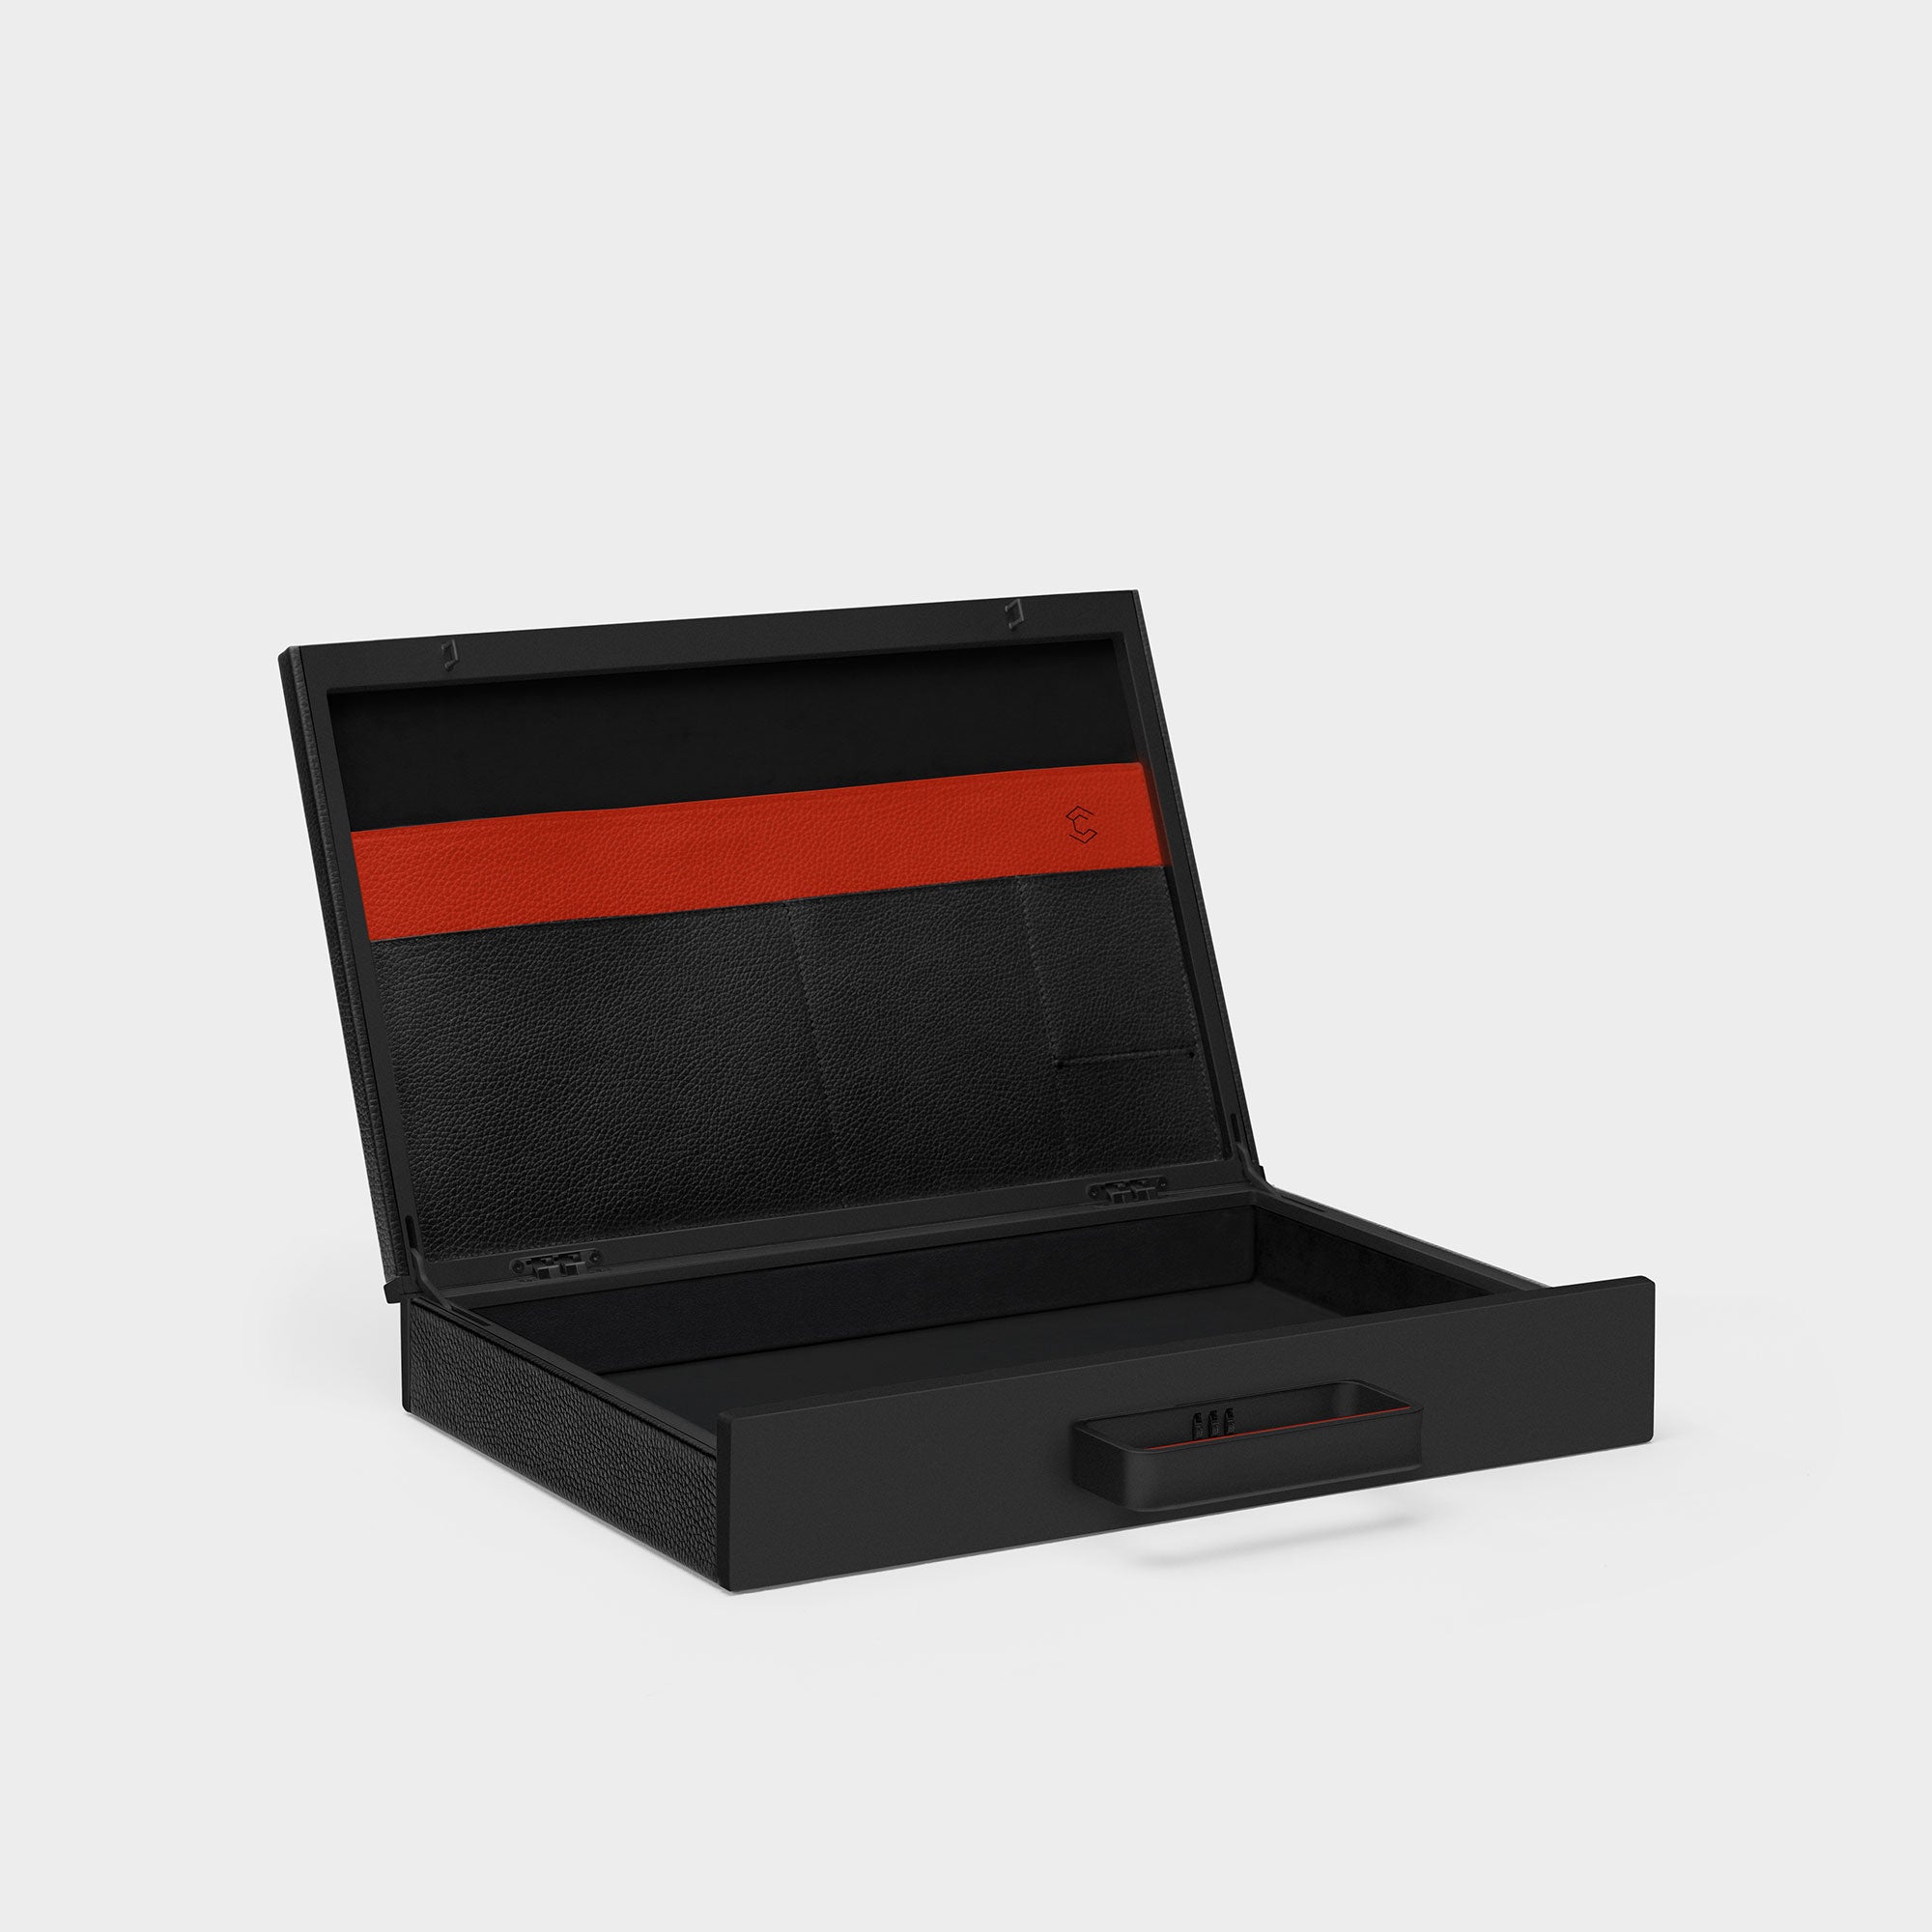 Interior view of Mackenzie briefcase in all black with red leather accents, showcasing soft Alcantara lining and internal pockets made from fine French leather